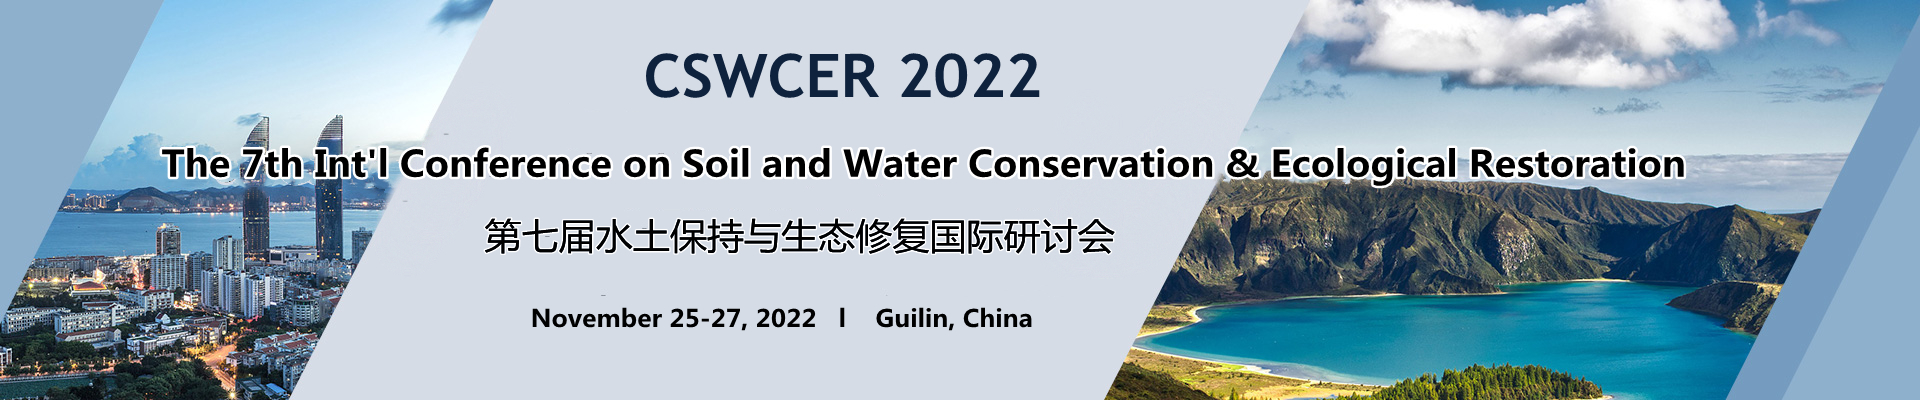 The 7th Int'l Conference on Soil and Water Conservation & Ecological Restoration (CSWCER 2022), Online Event